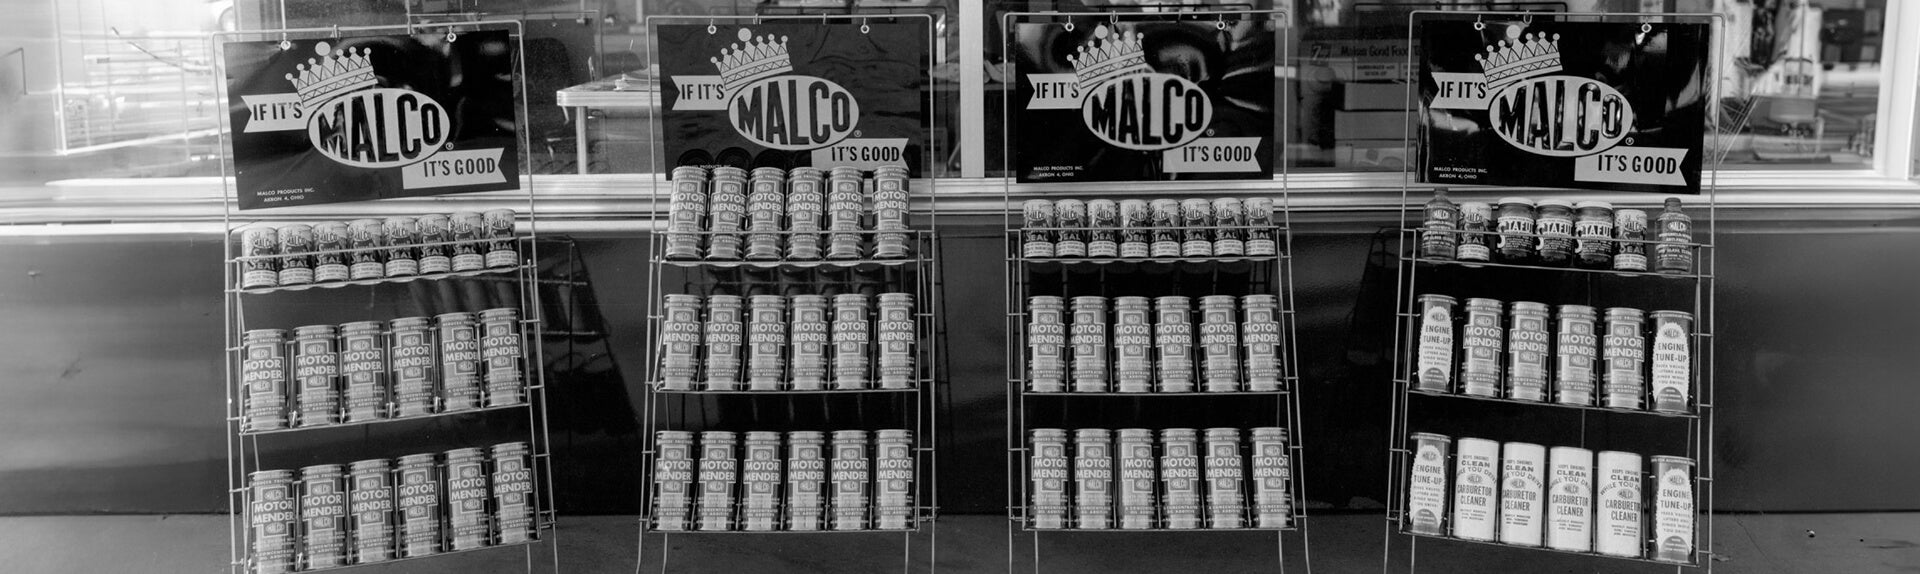 Malco Products, Inc. – Manufacturer of High Quality Products – Malco  Corporate